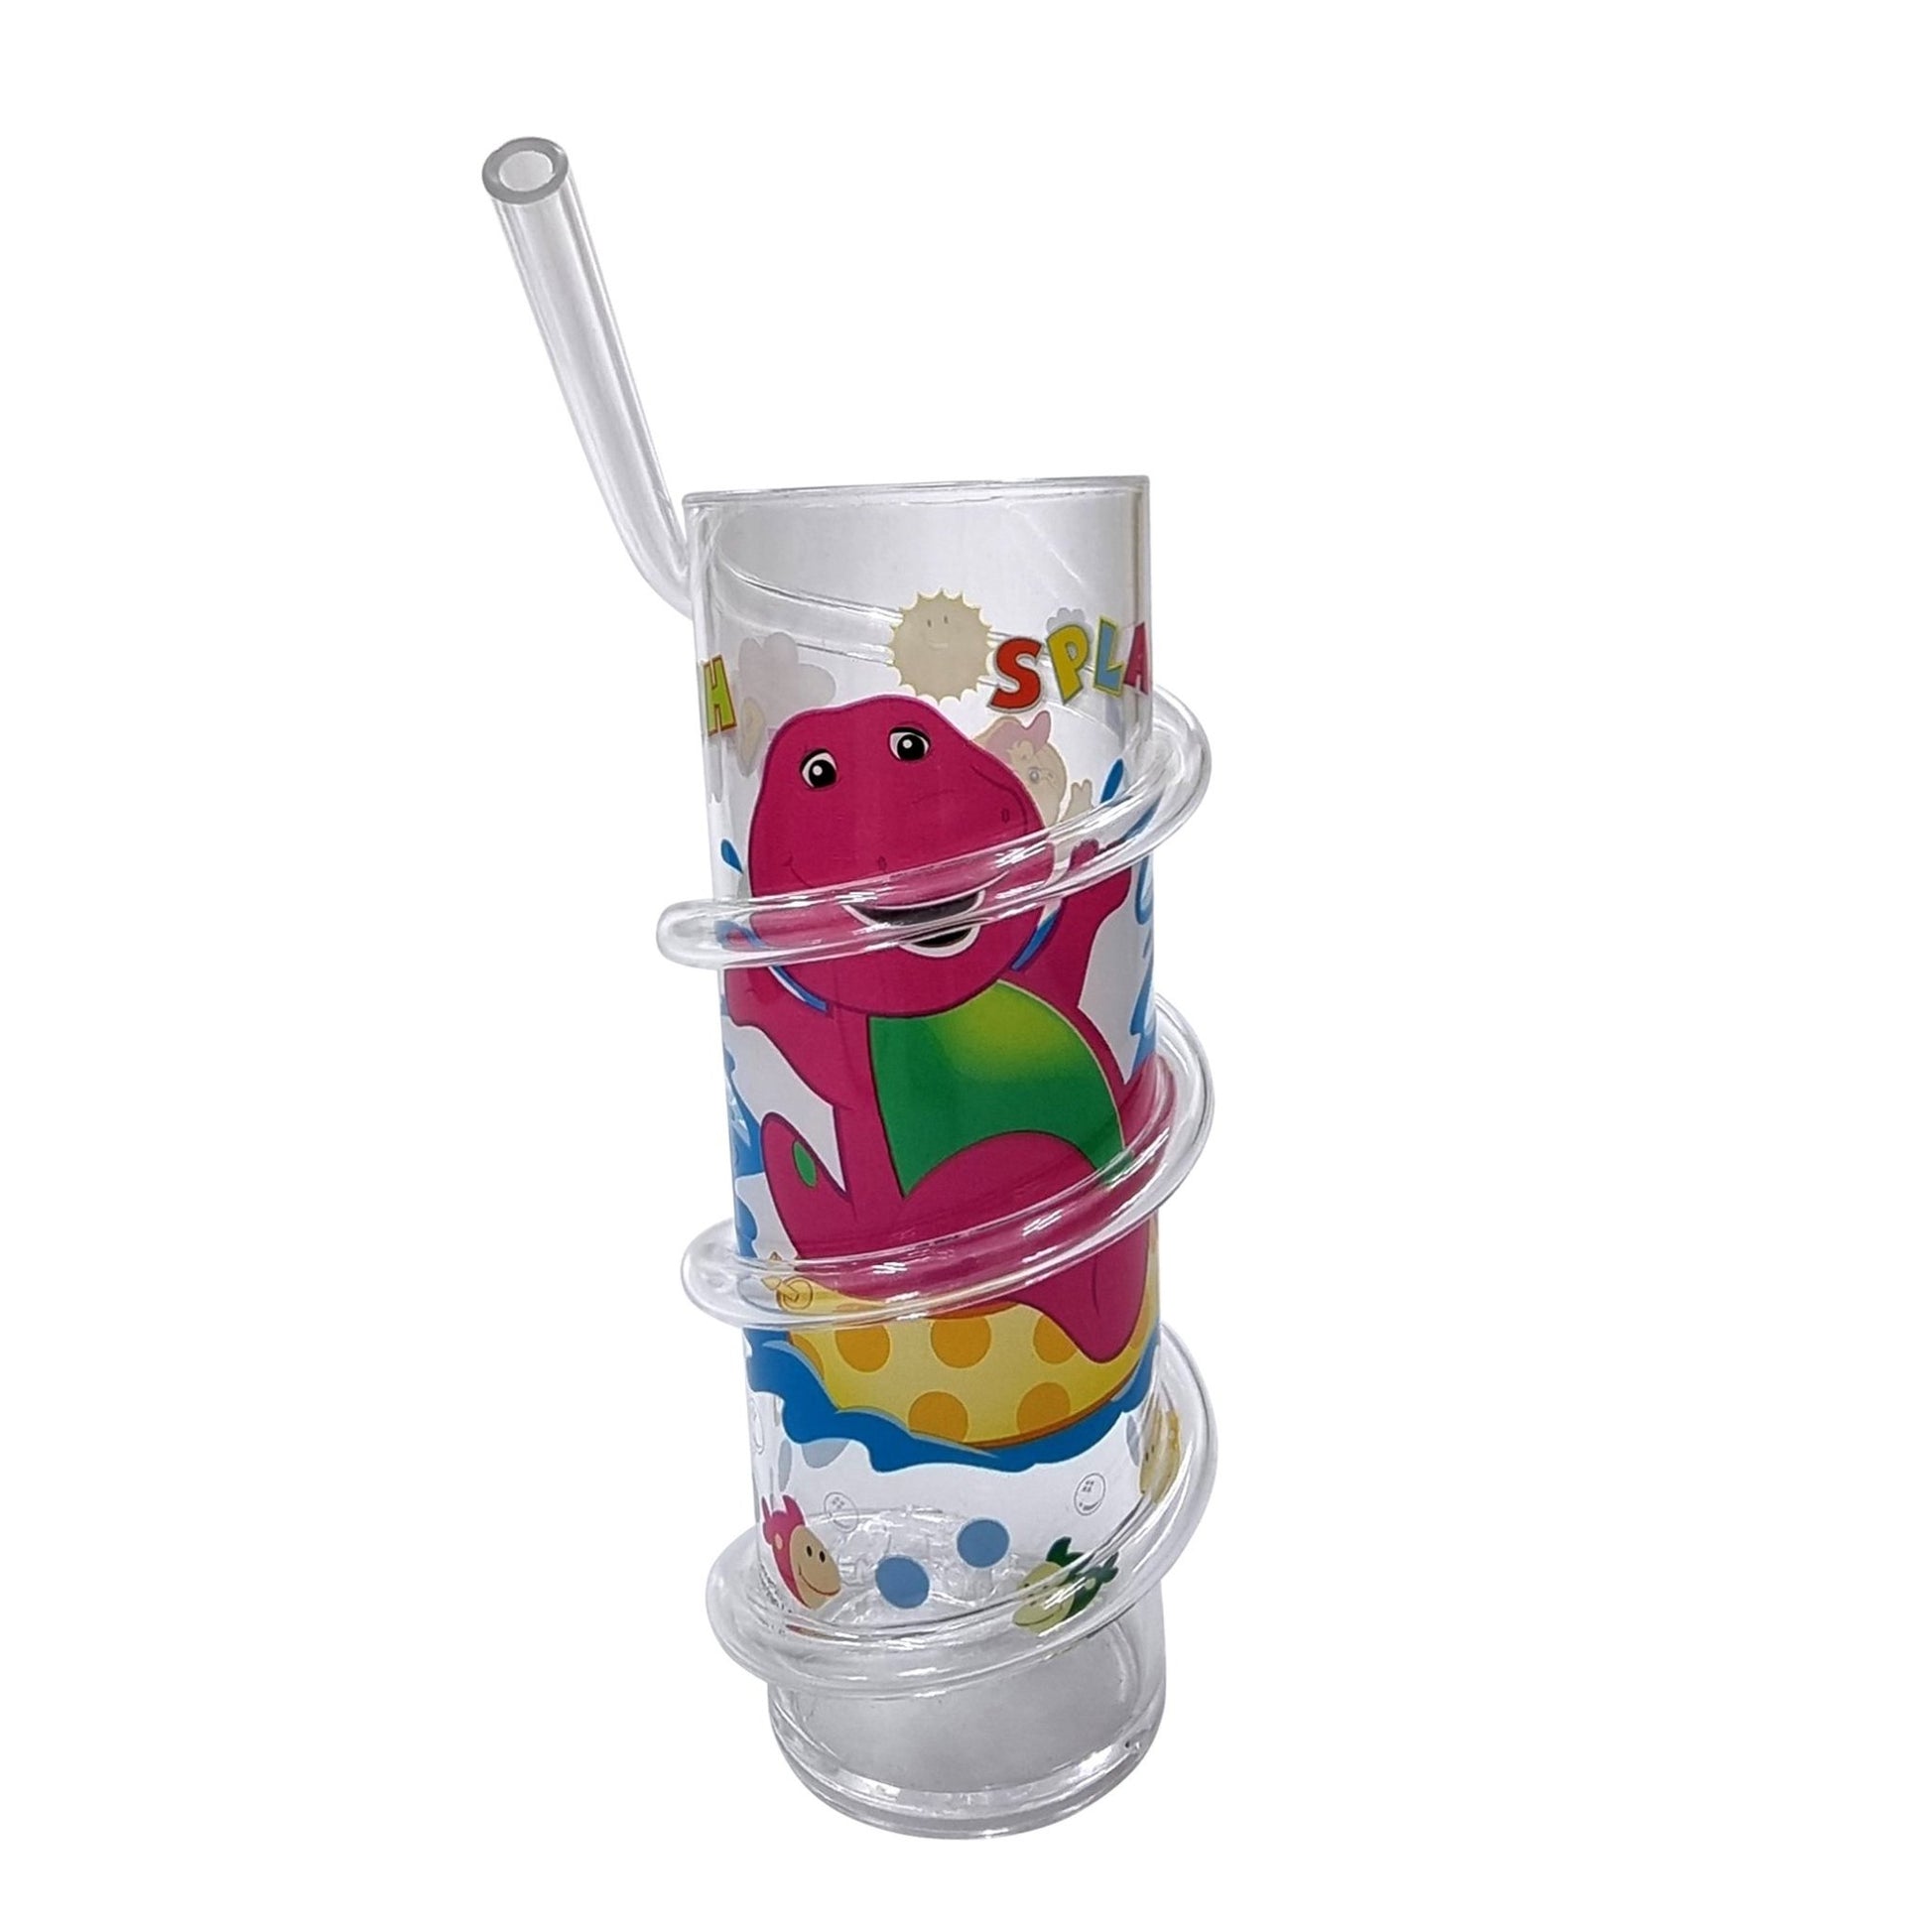 Spiral Cup - Assorted Prints - Simply Life